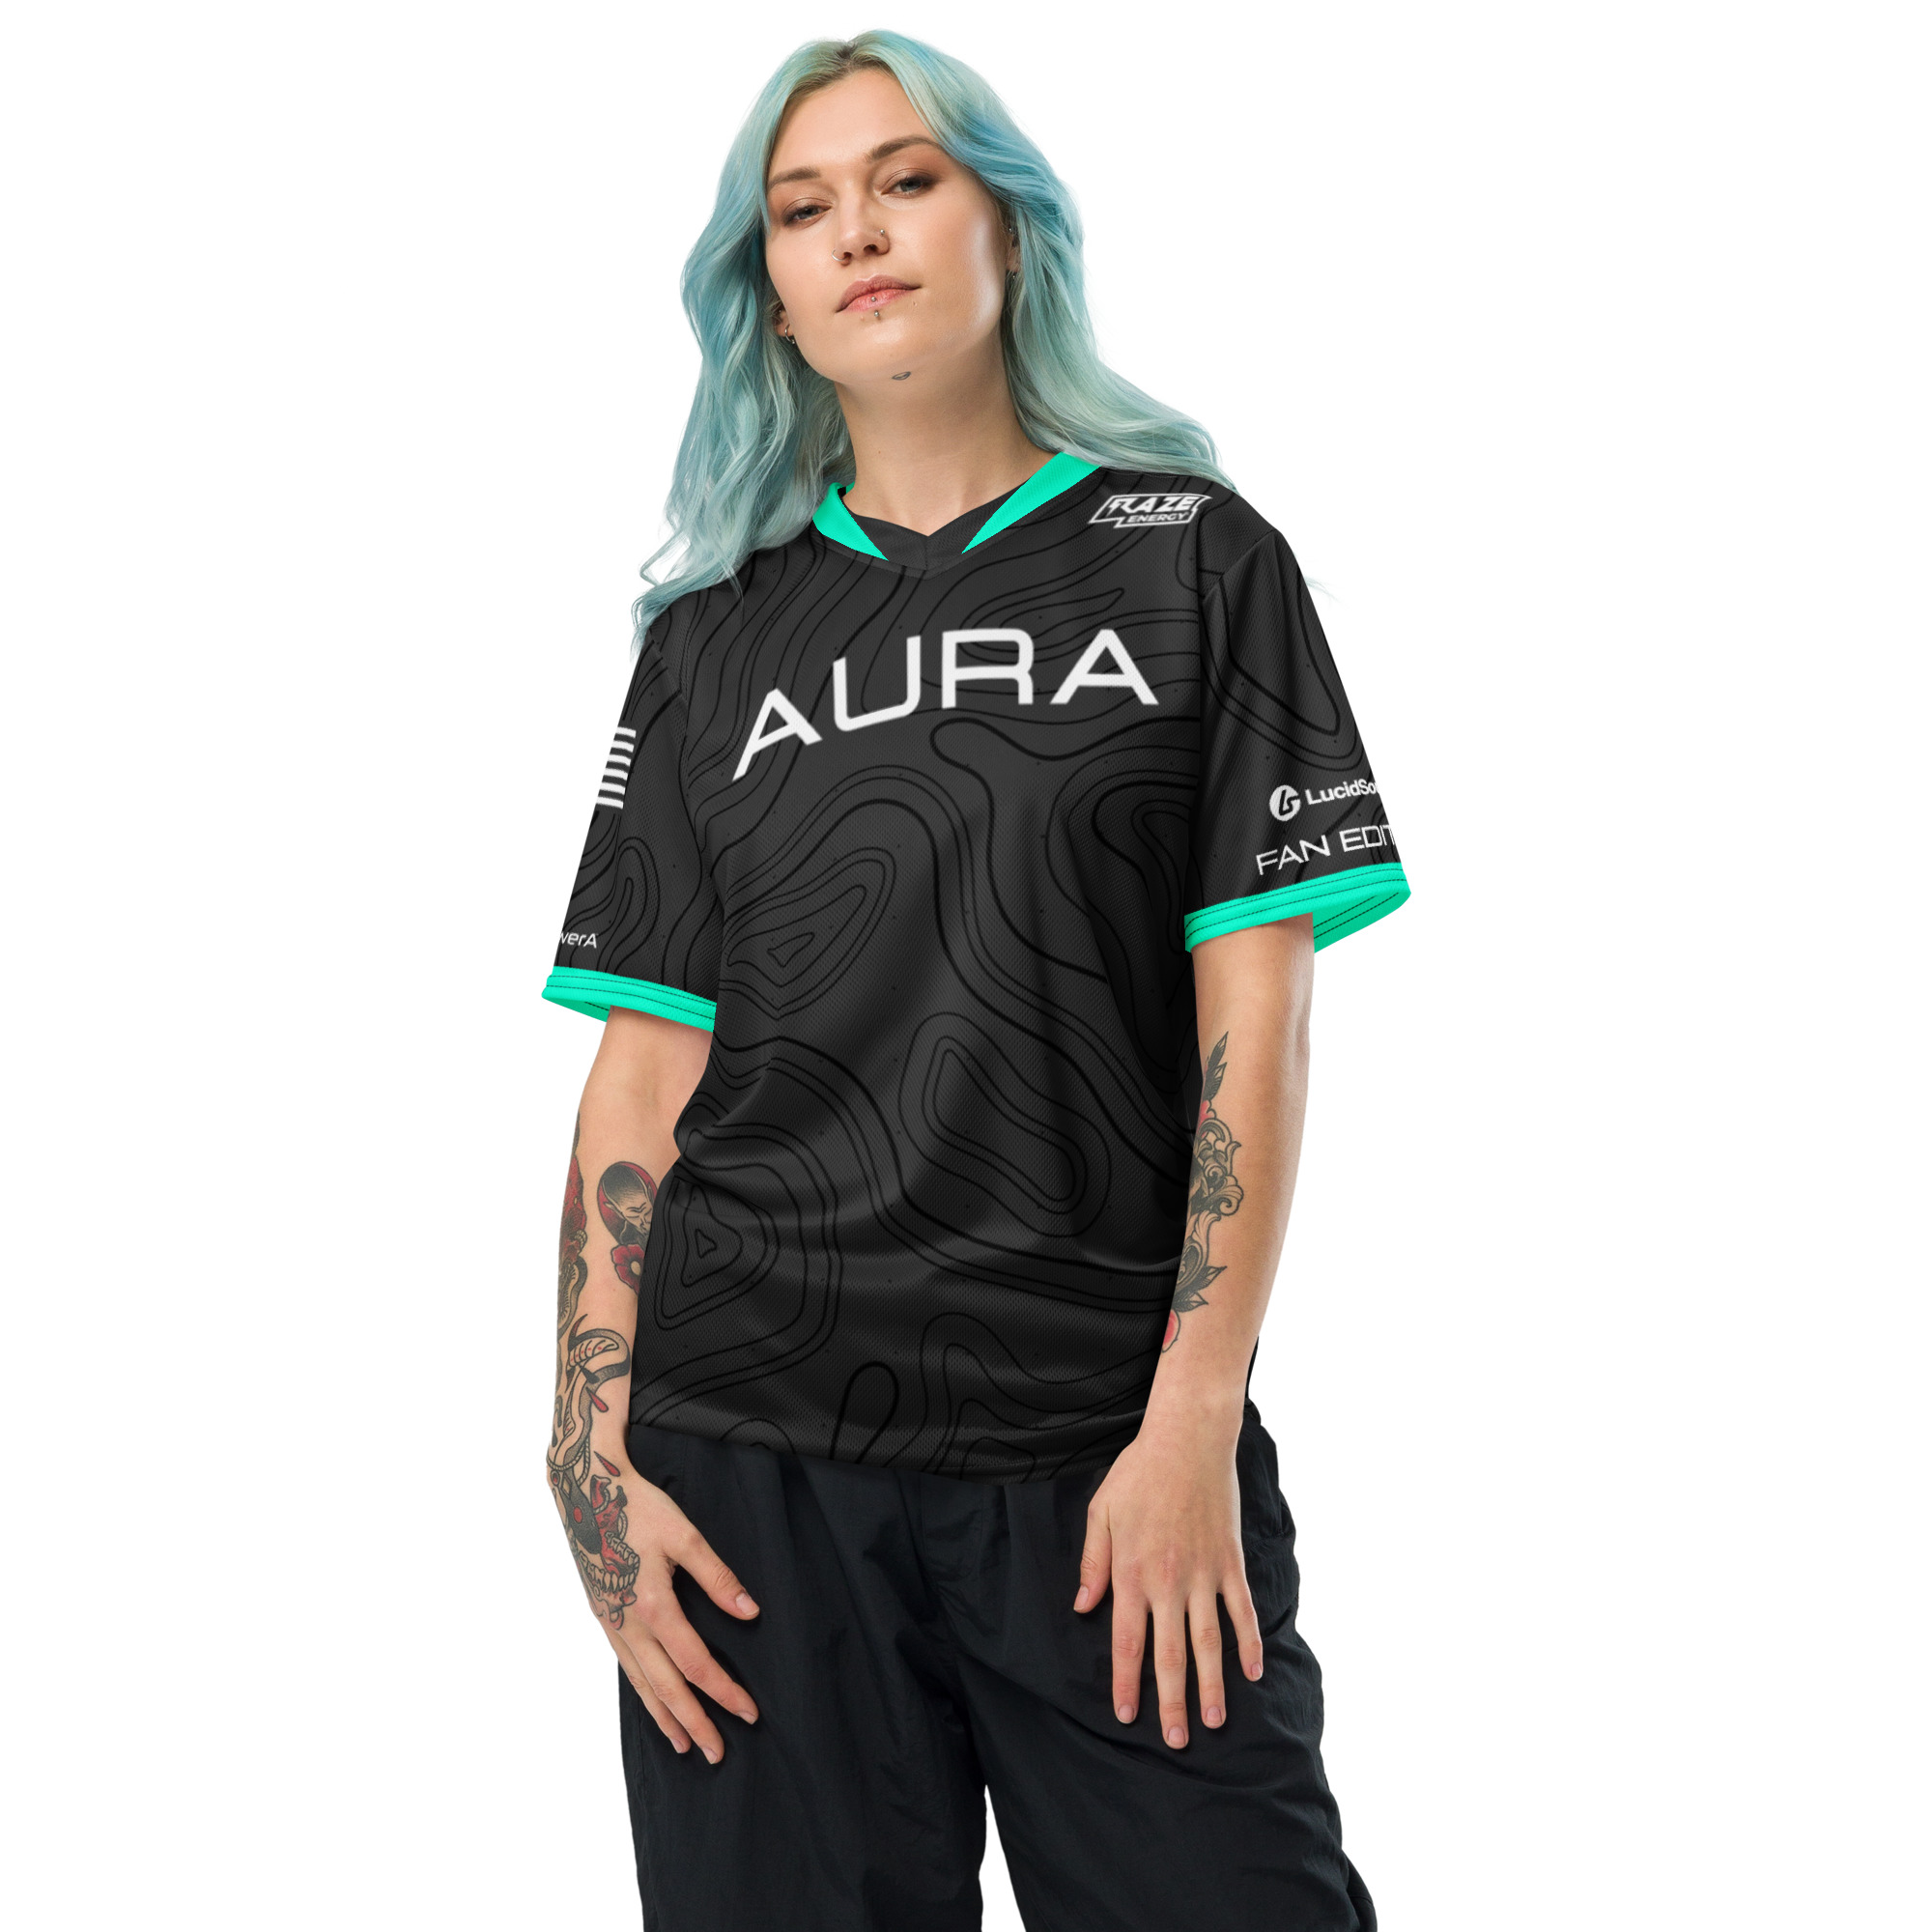 all-over-print-recycled-unisex-sports-jersey-white-front-63bef56ccdc4b.jpg